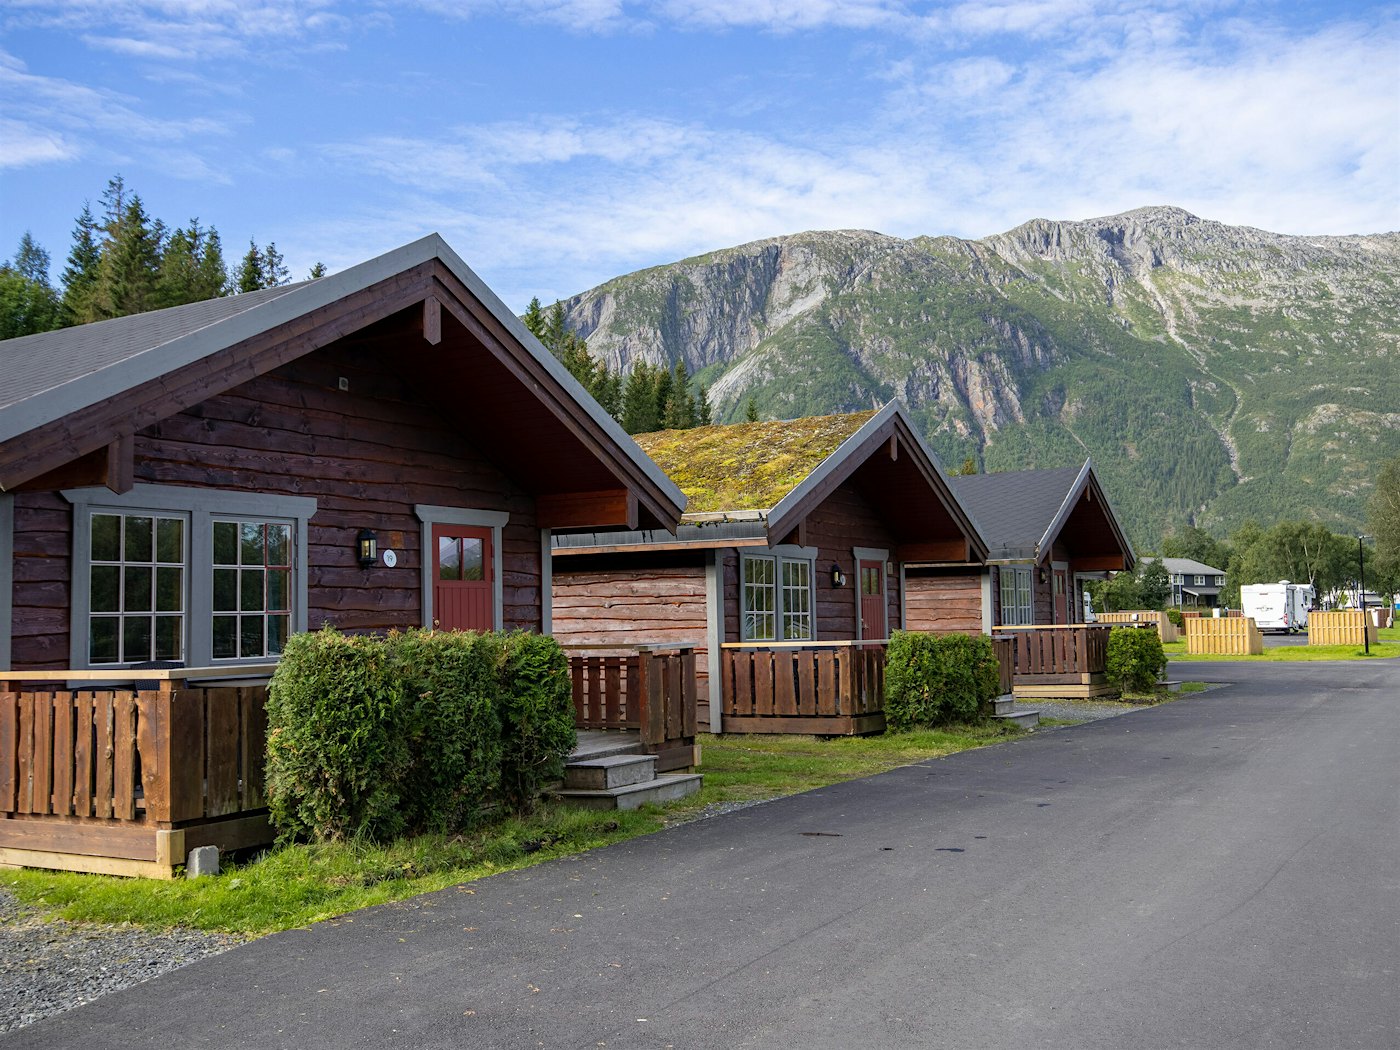 Three log cabins with grass on the roof and green lawn around, with mountains in the background. Photo